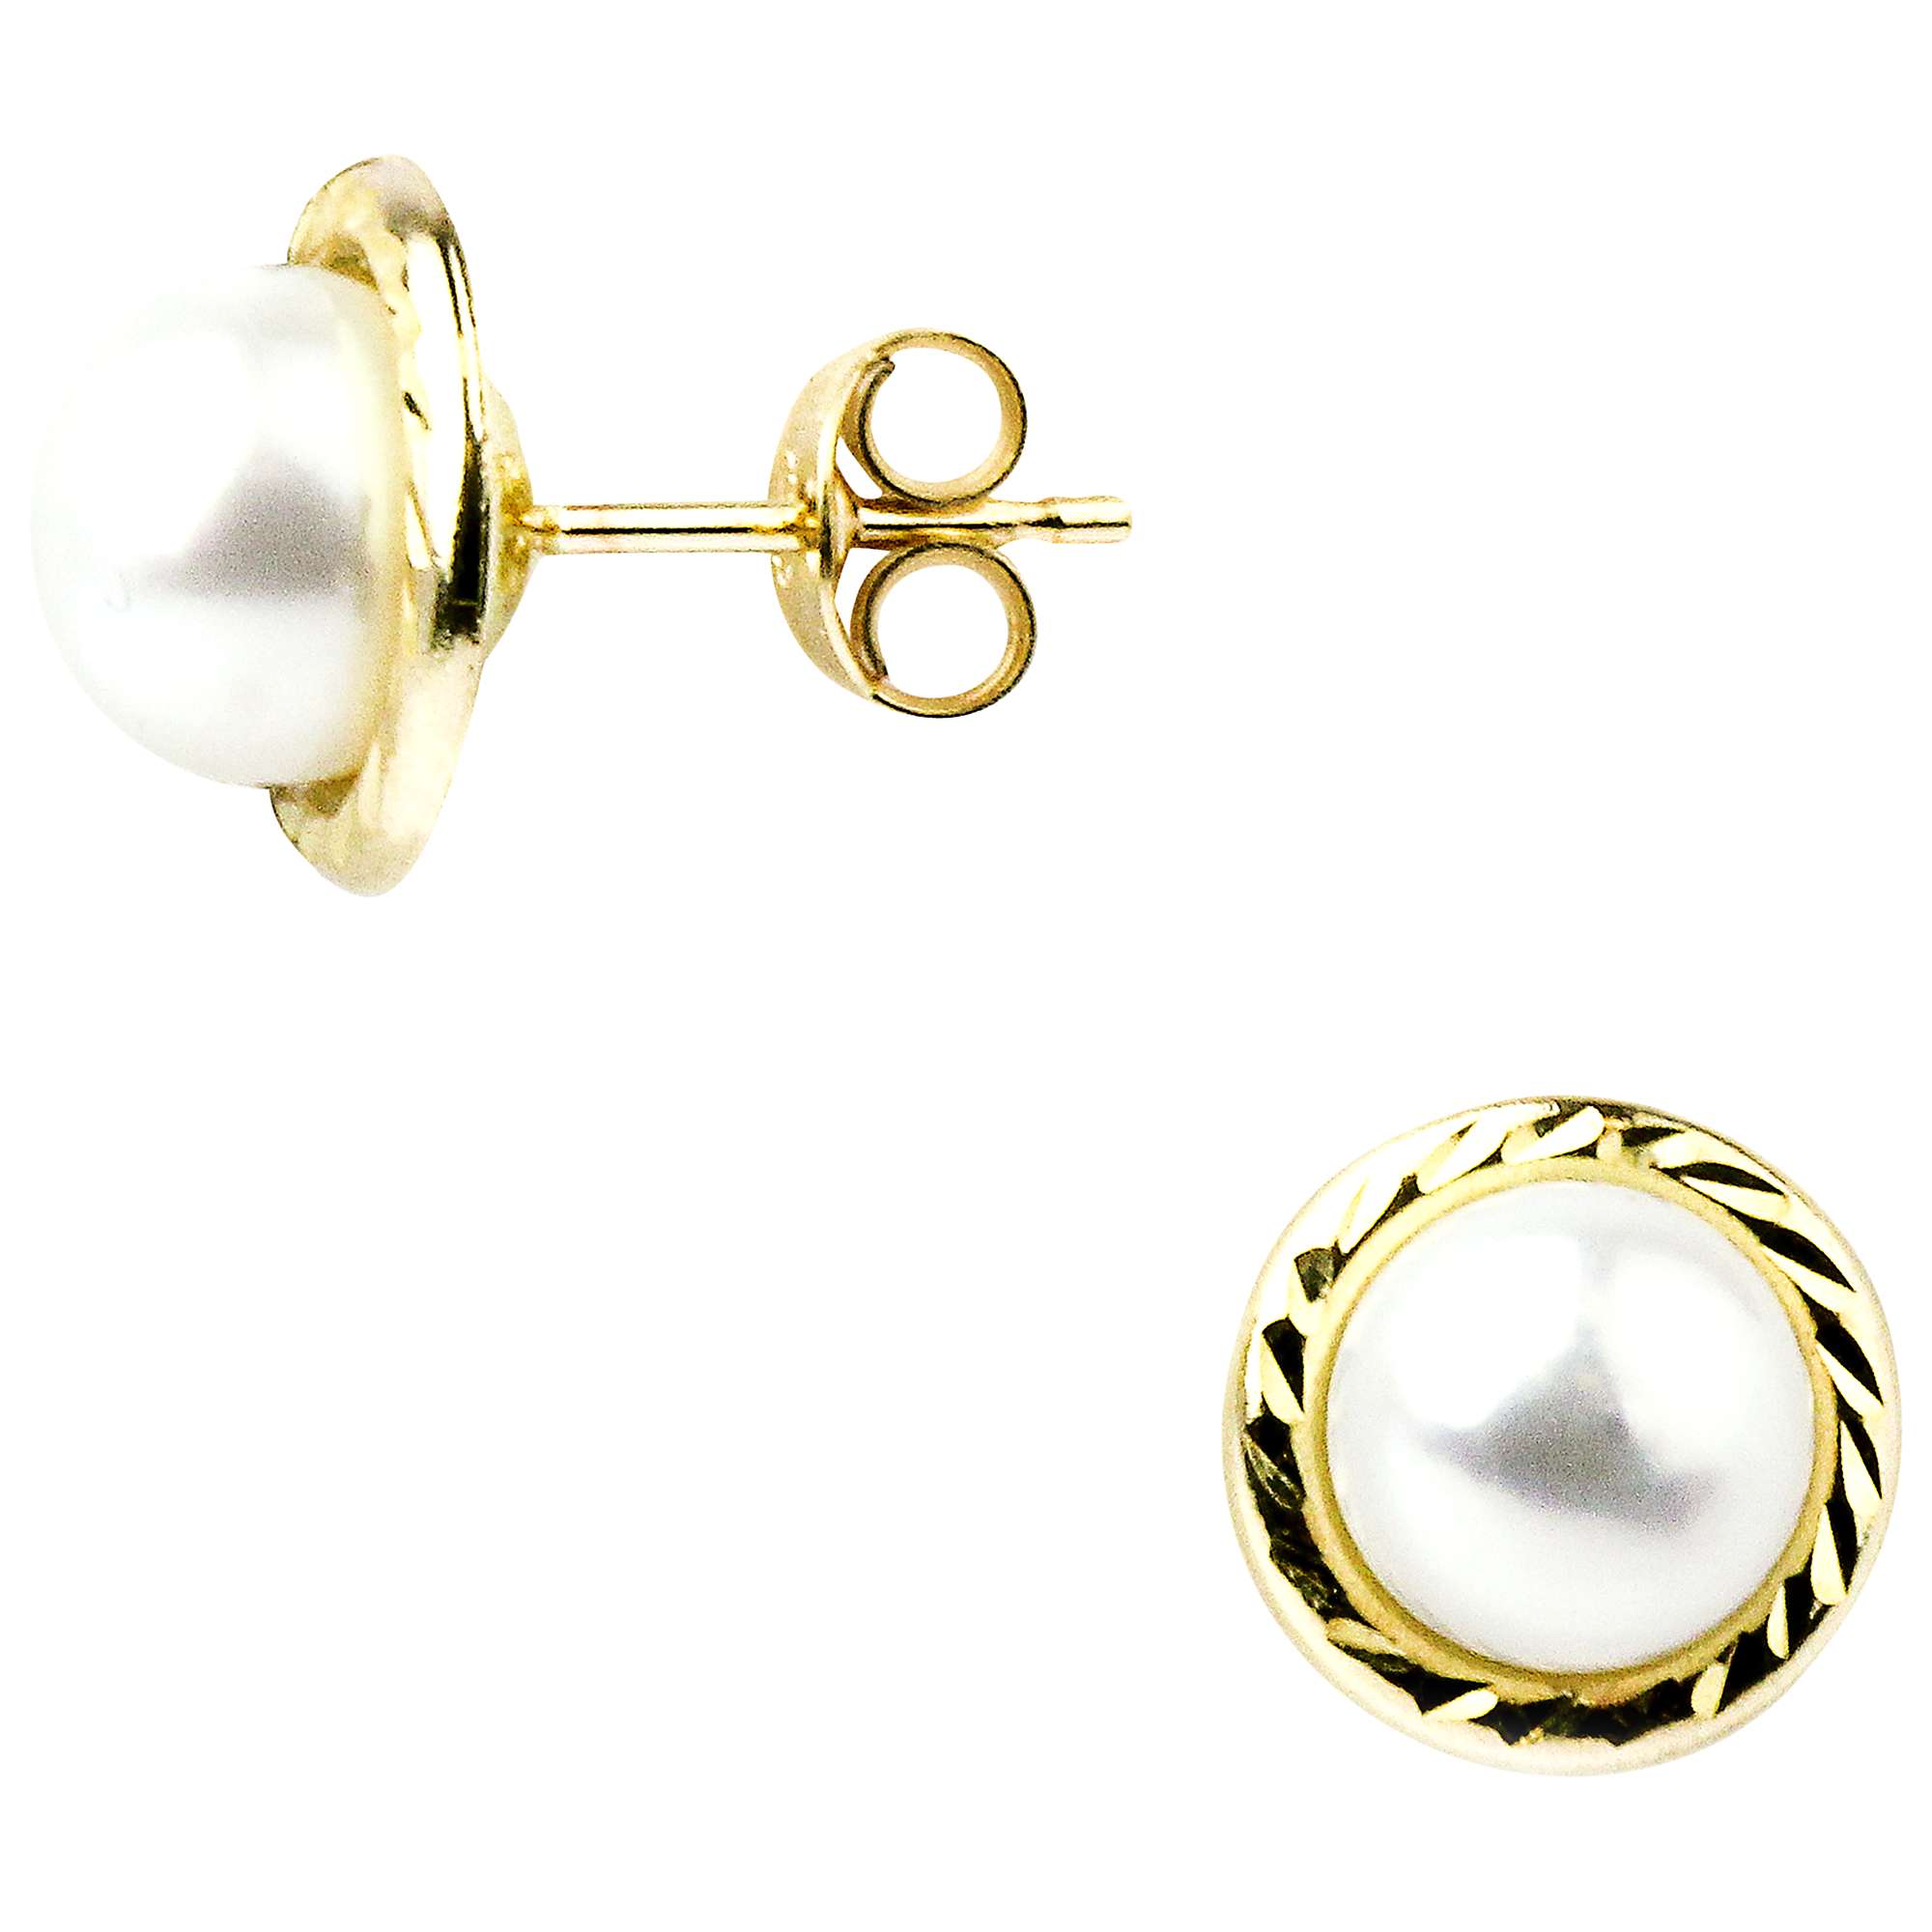 Buy A B Davis 9ct Yellow Gold Border Freshwater Pearl Stud Earrings Online at johnlewis.com